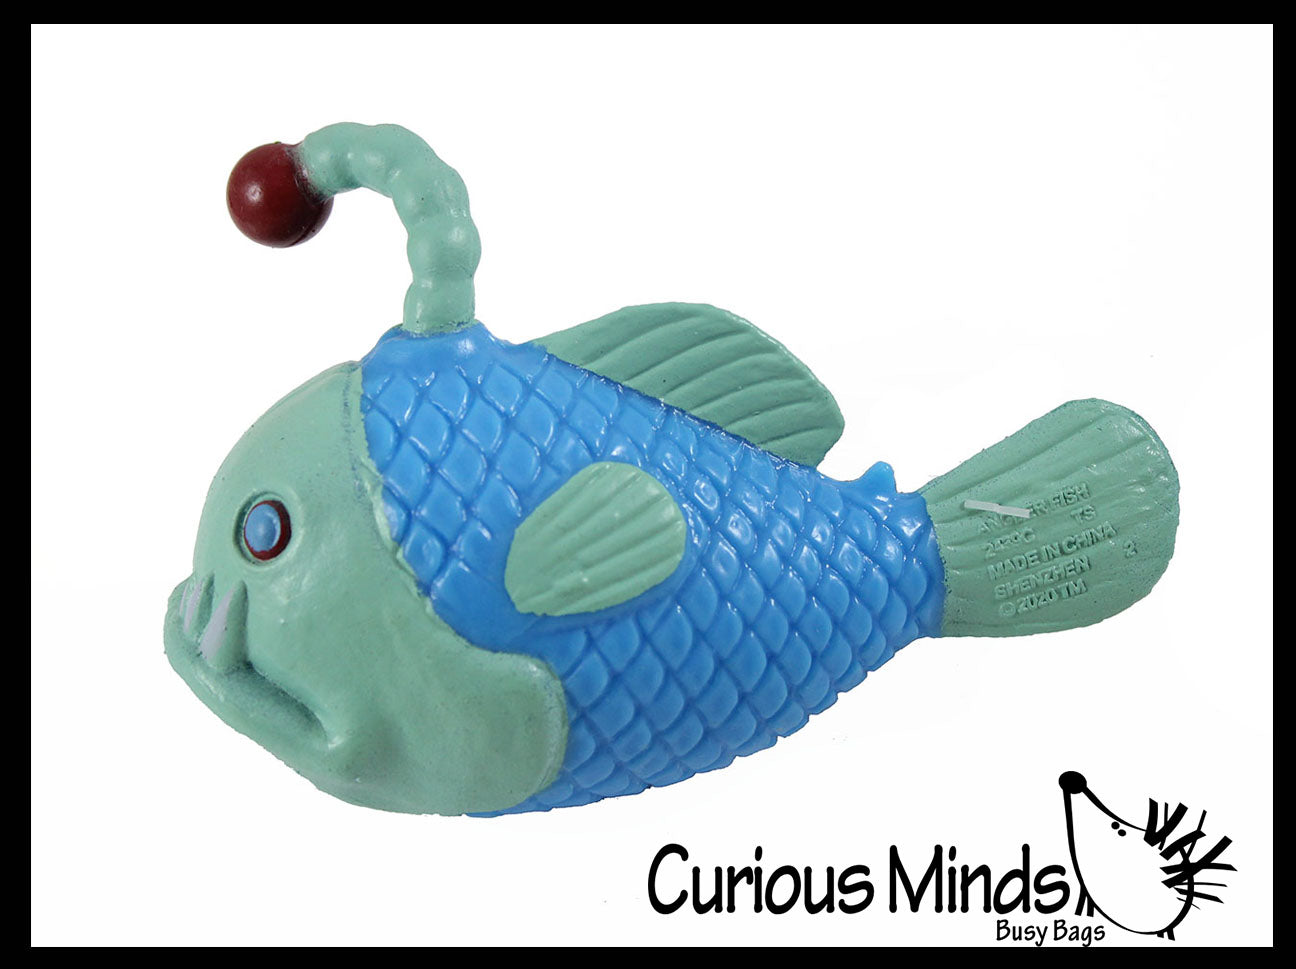 Angler Fish Cute Sea Creatures Stretchy and Squeezy Toy - Crunchy Bead Filled - Fidget Stress Ball - Flashlight Fish 1 Random Color